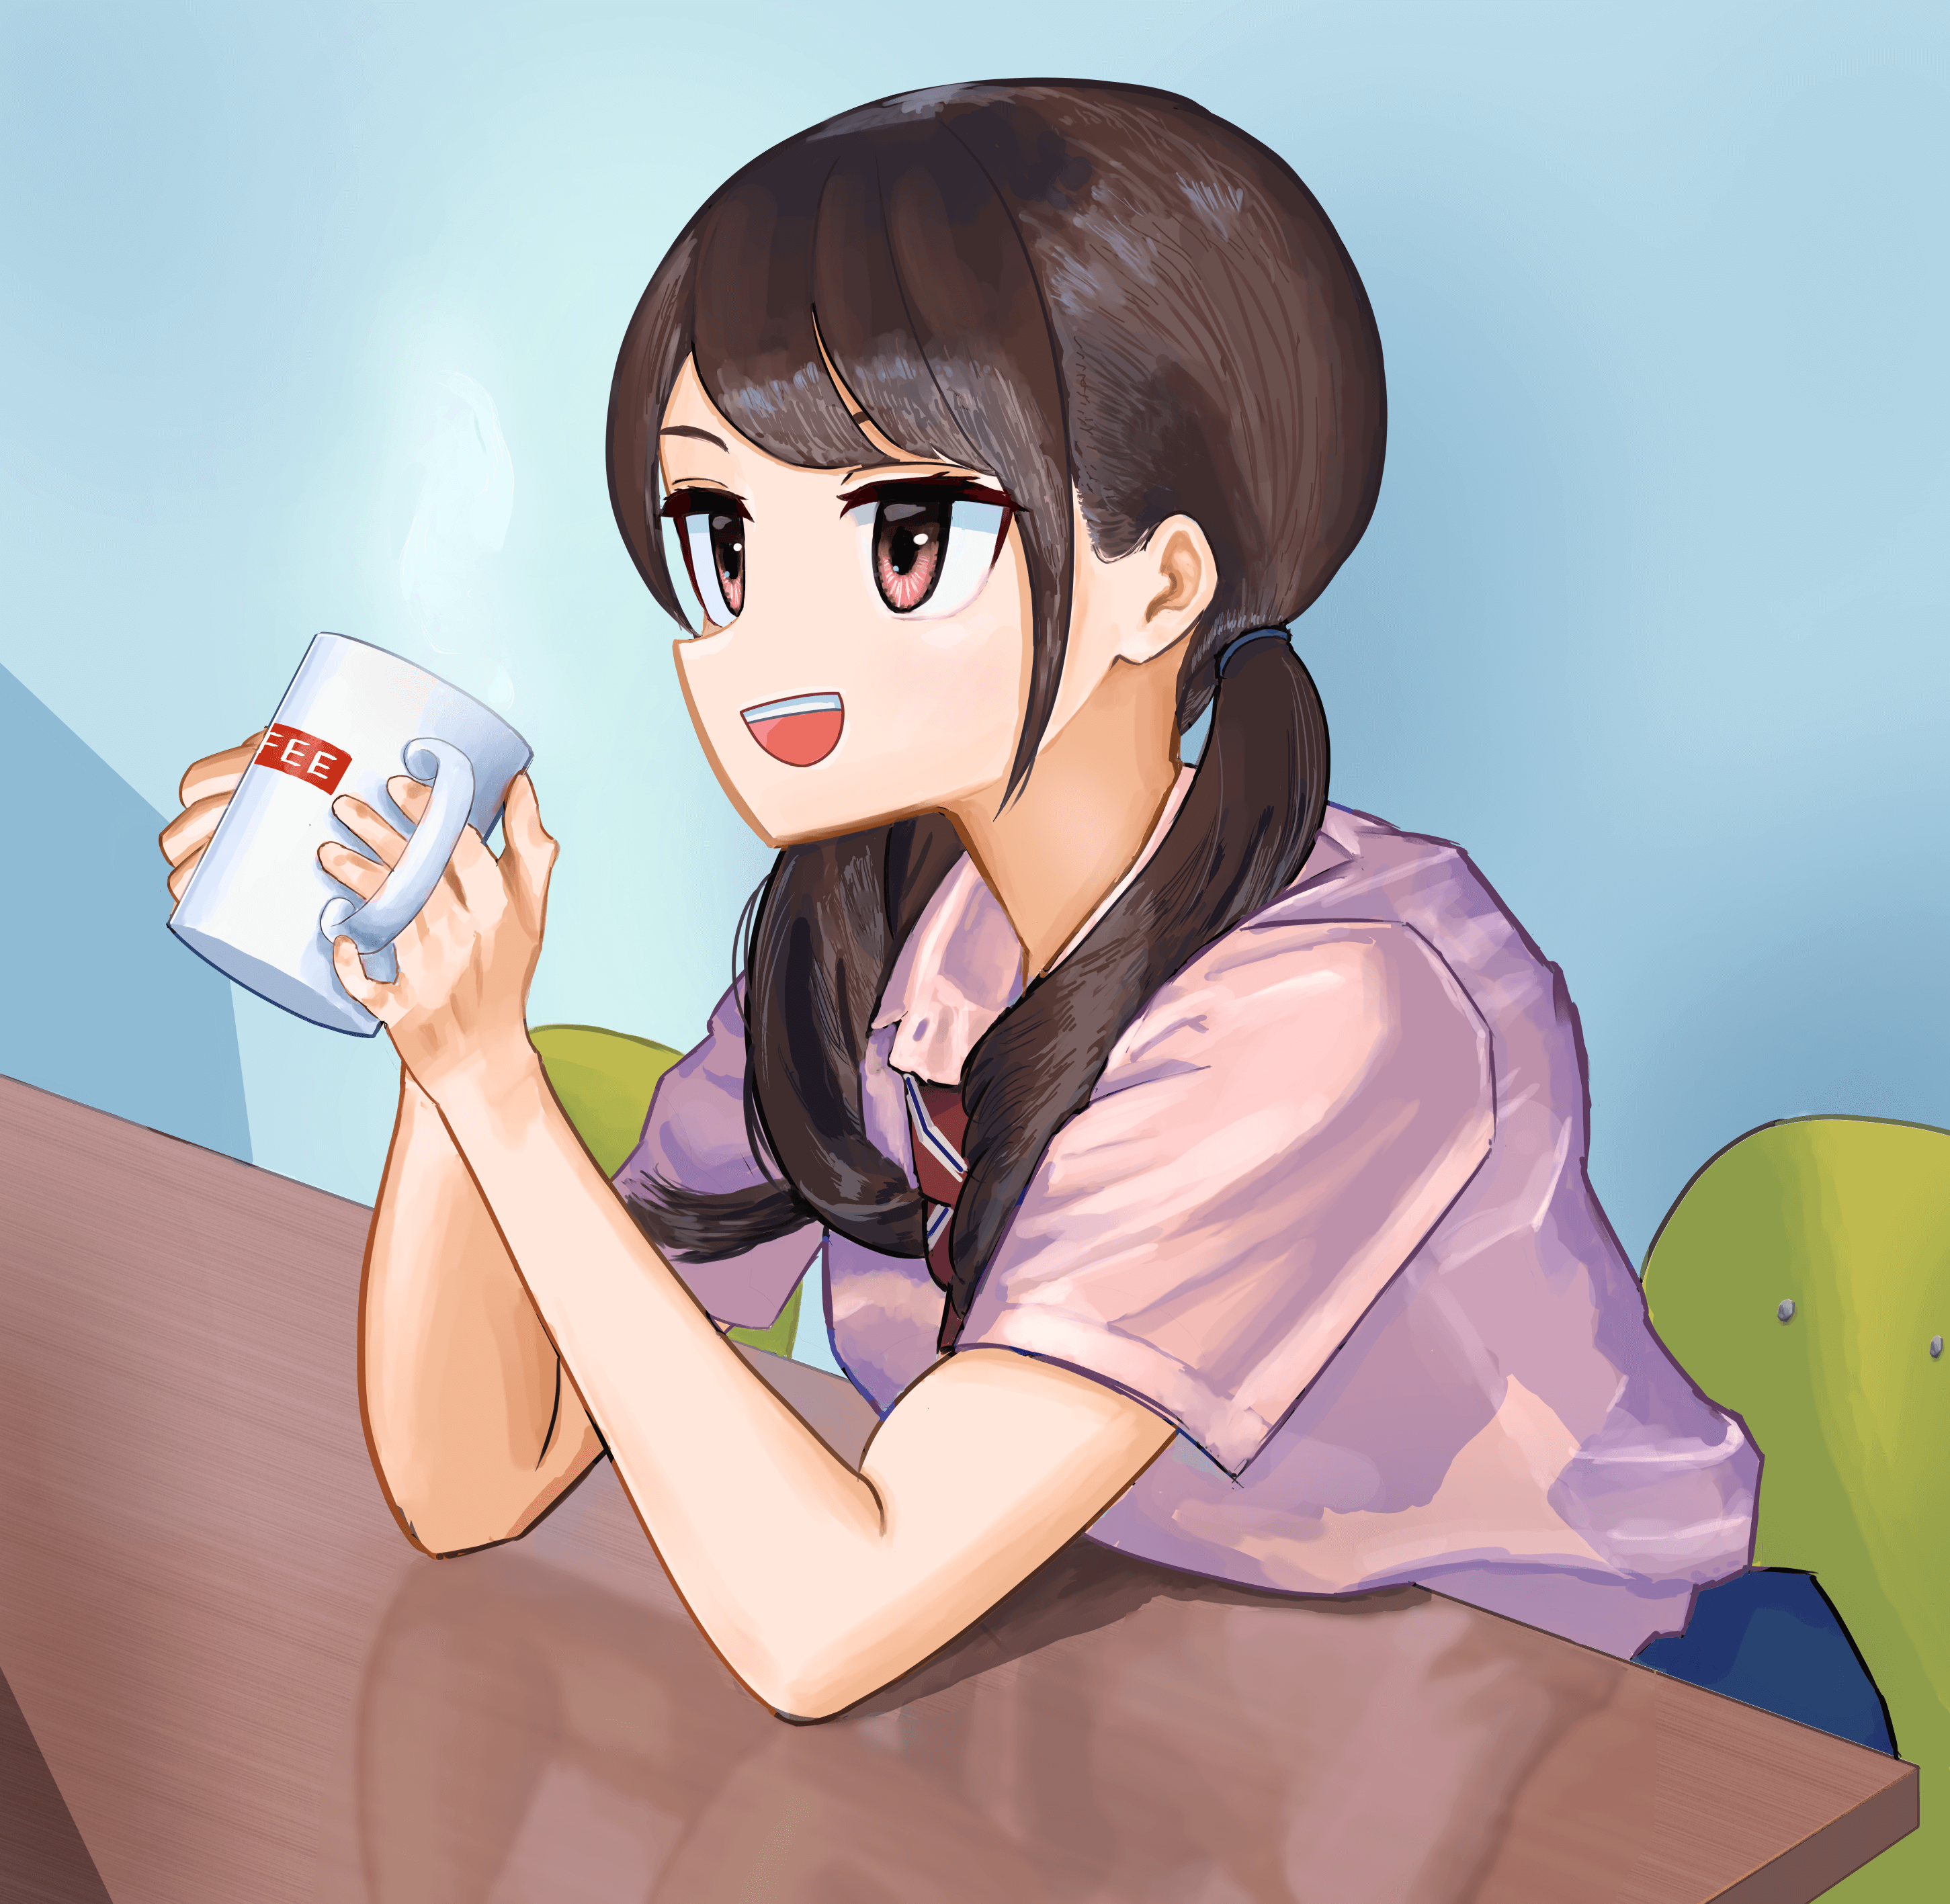 images/others/illust/2022_10_28-coffee_girl_03.png